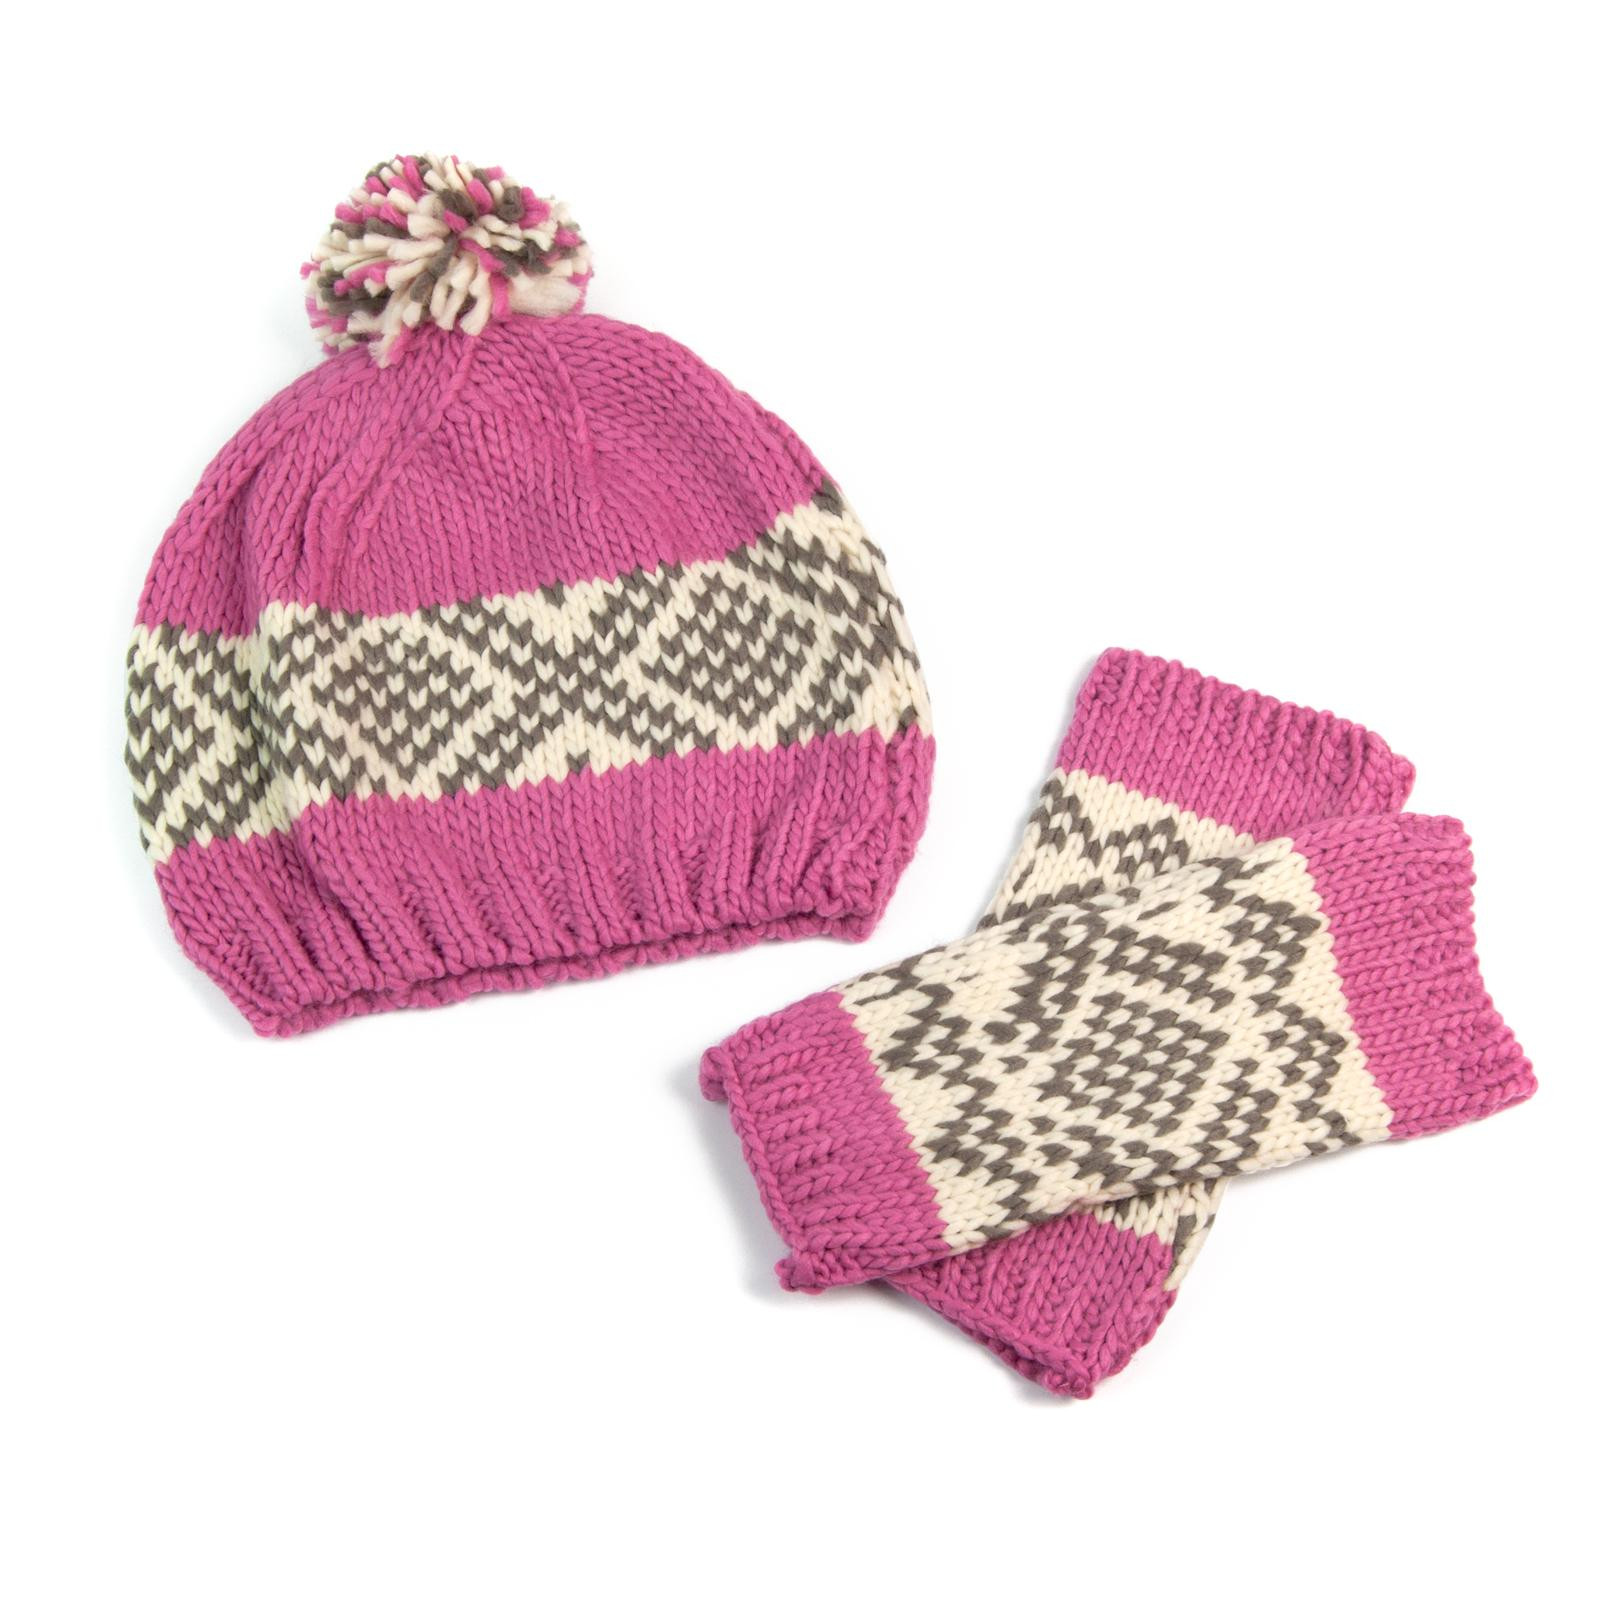 Art Of Polo Hat&Gloves Cz2600-2 Pink 57-62 cm